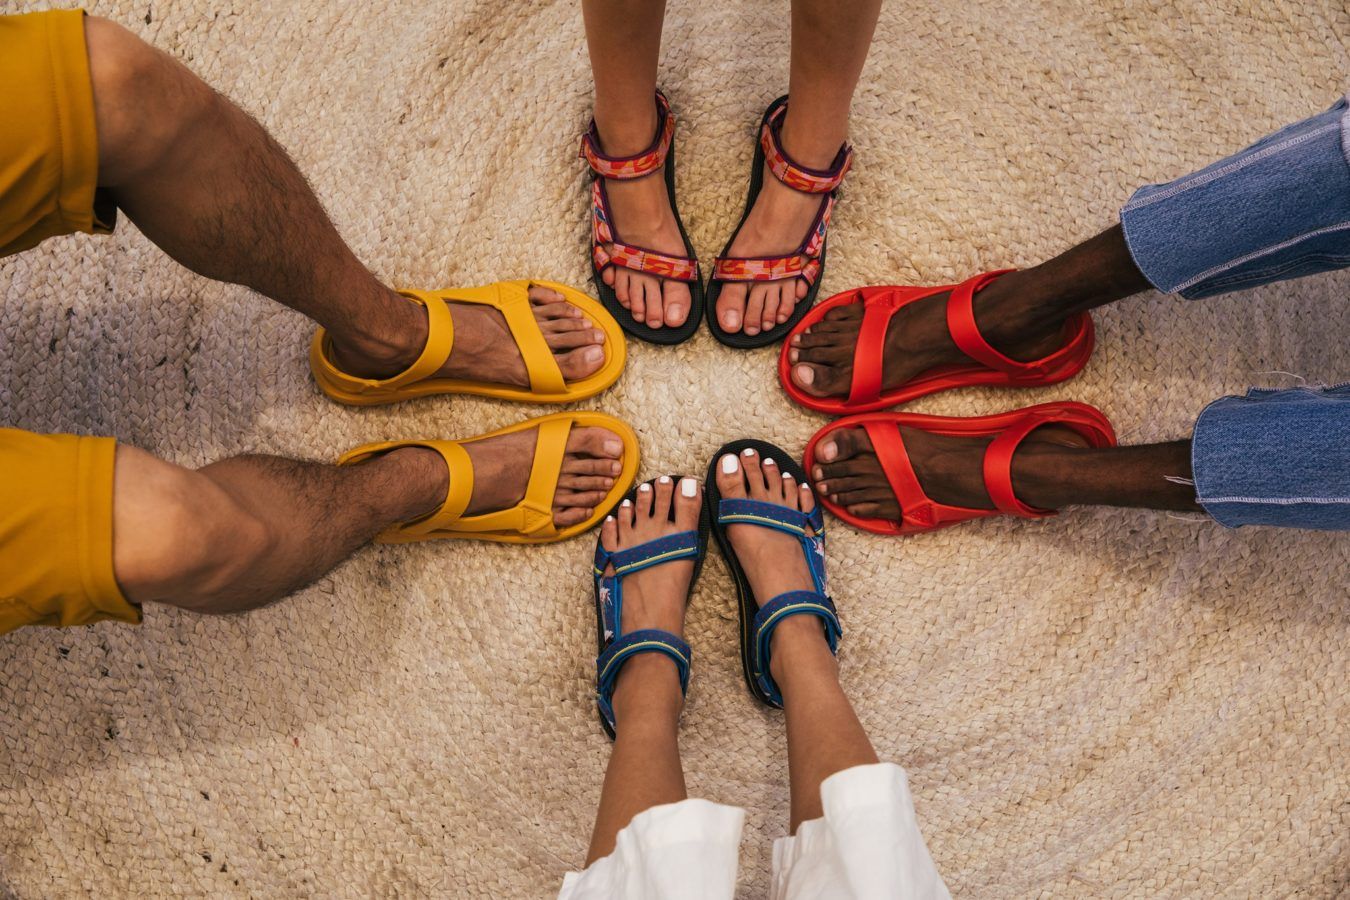 Larry Belmont crush presse Why everybody needs a pair of ugly sandals for the weekend